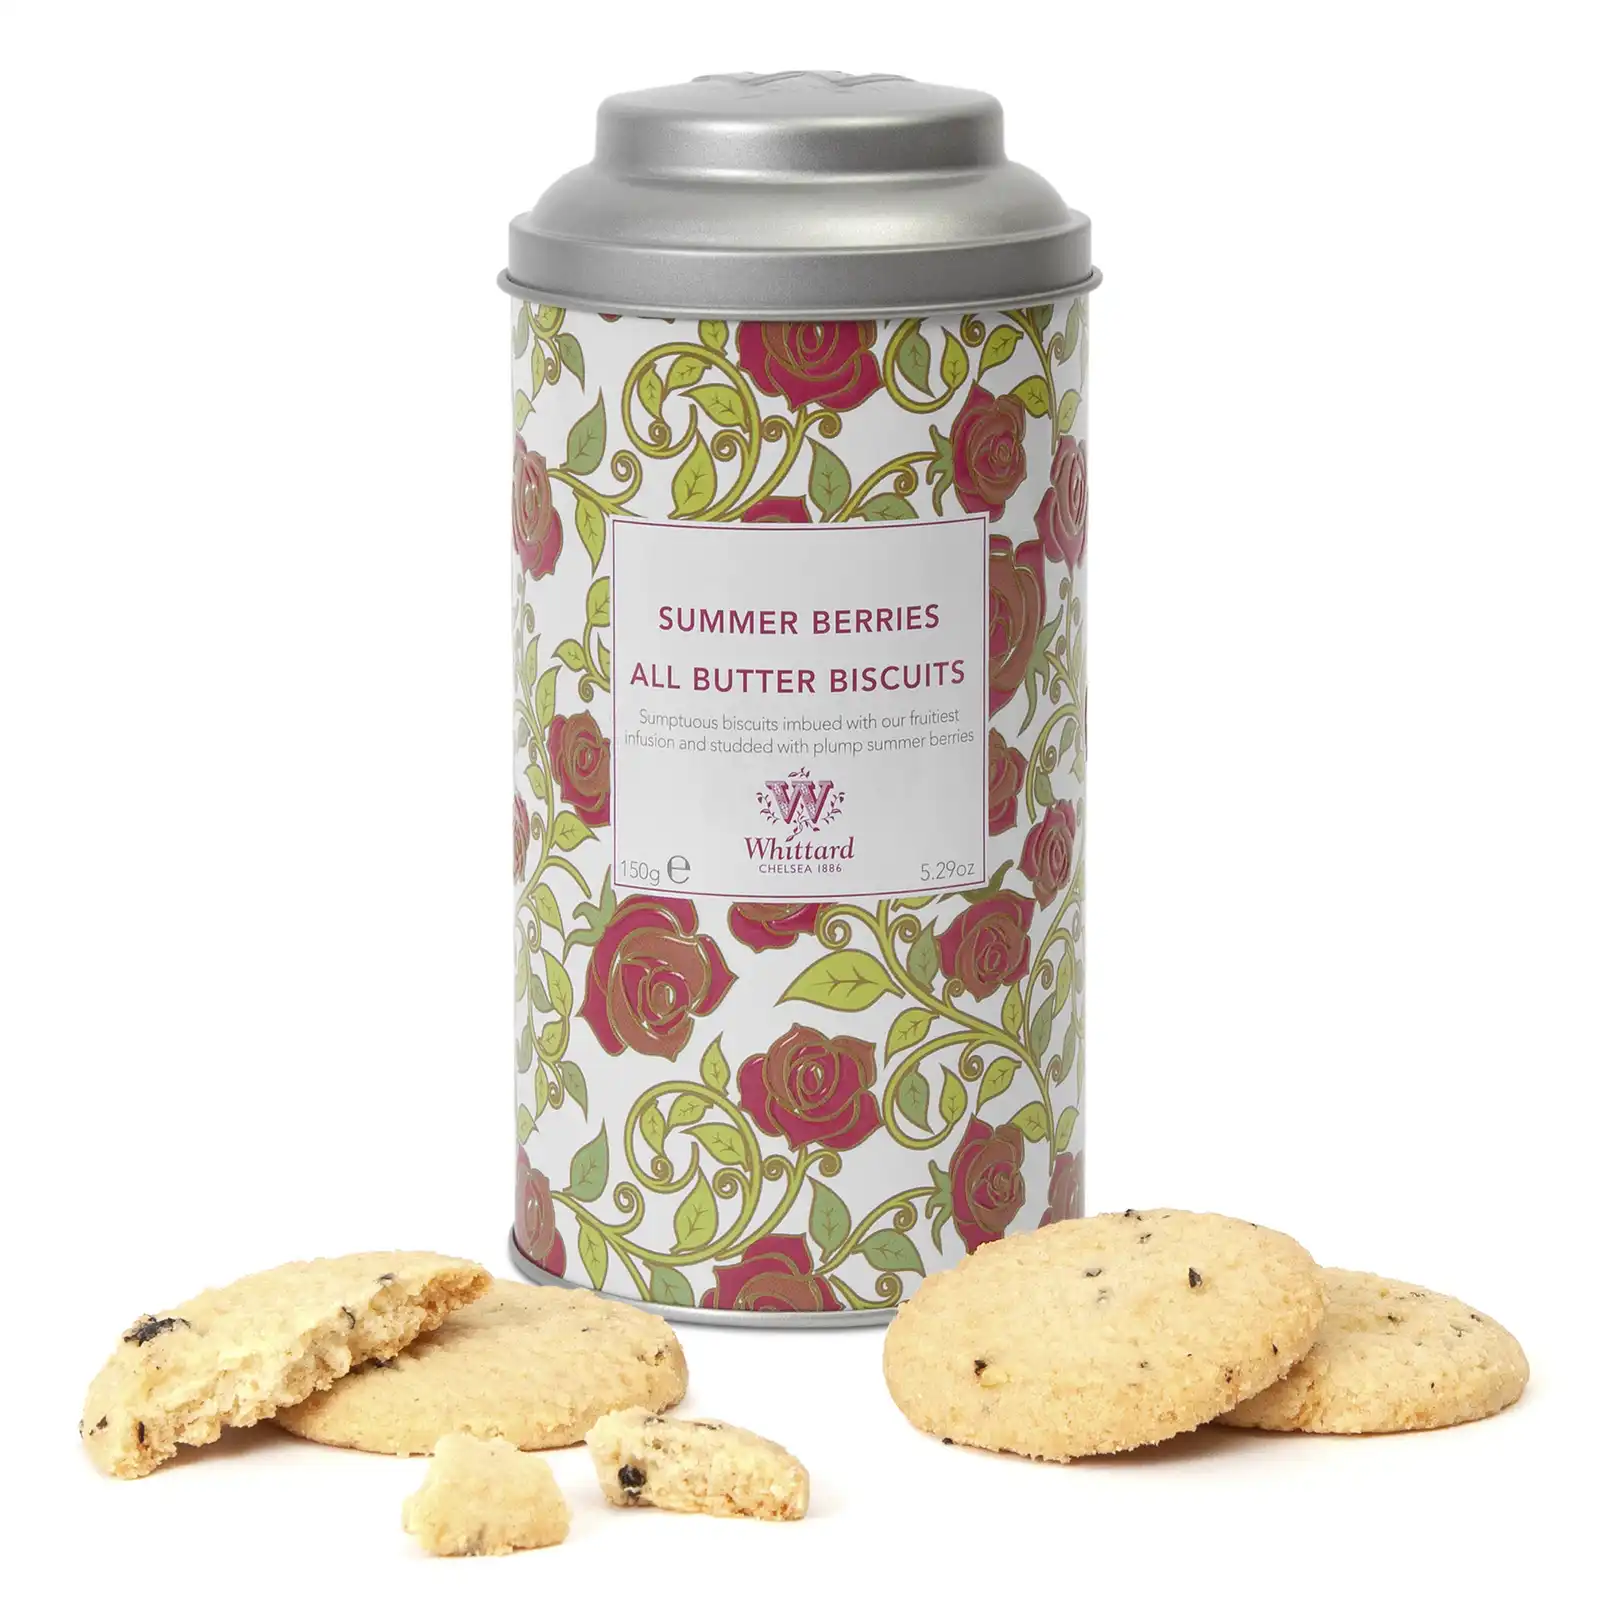 Whittard TD Biscuits - Strawberry & Cream Biscuits with White Chocolate Chips Tube (150g)